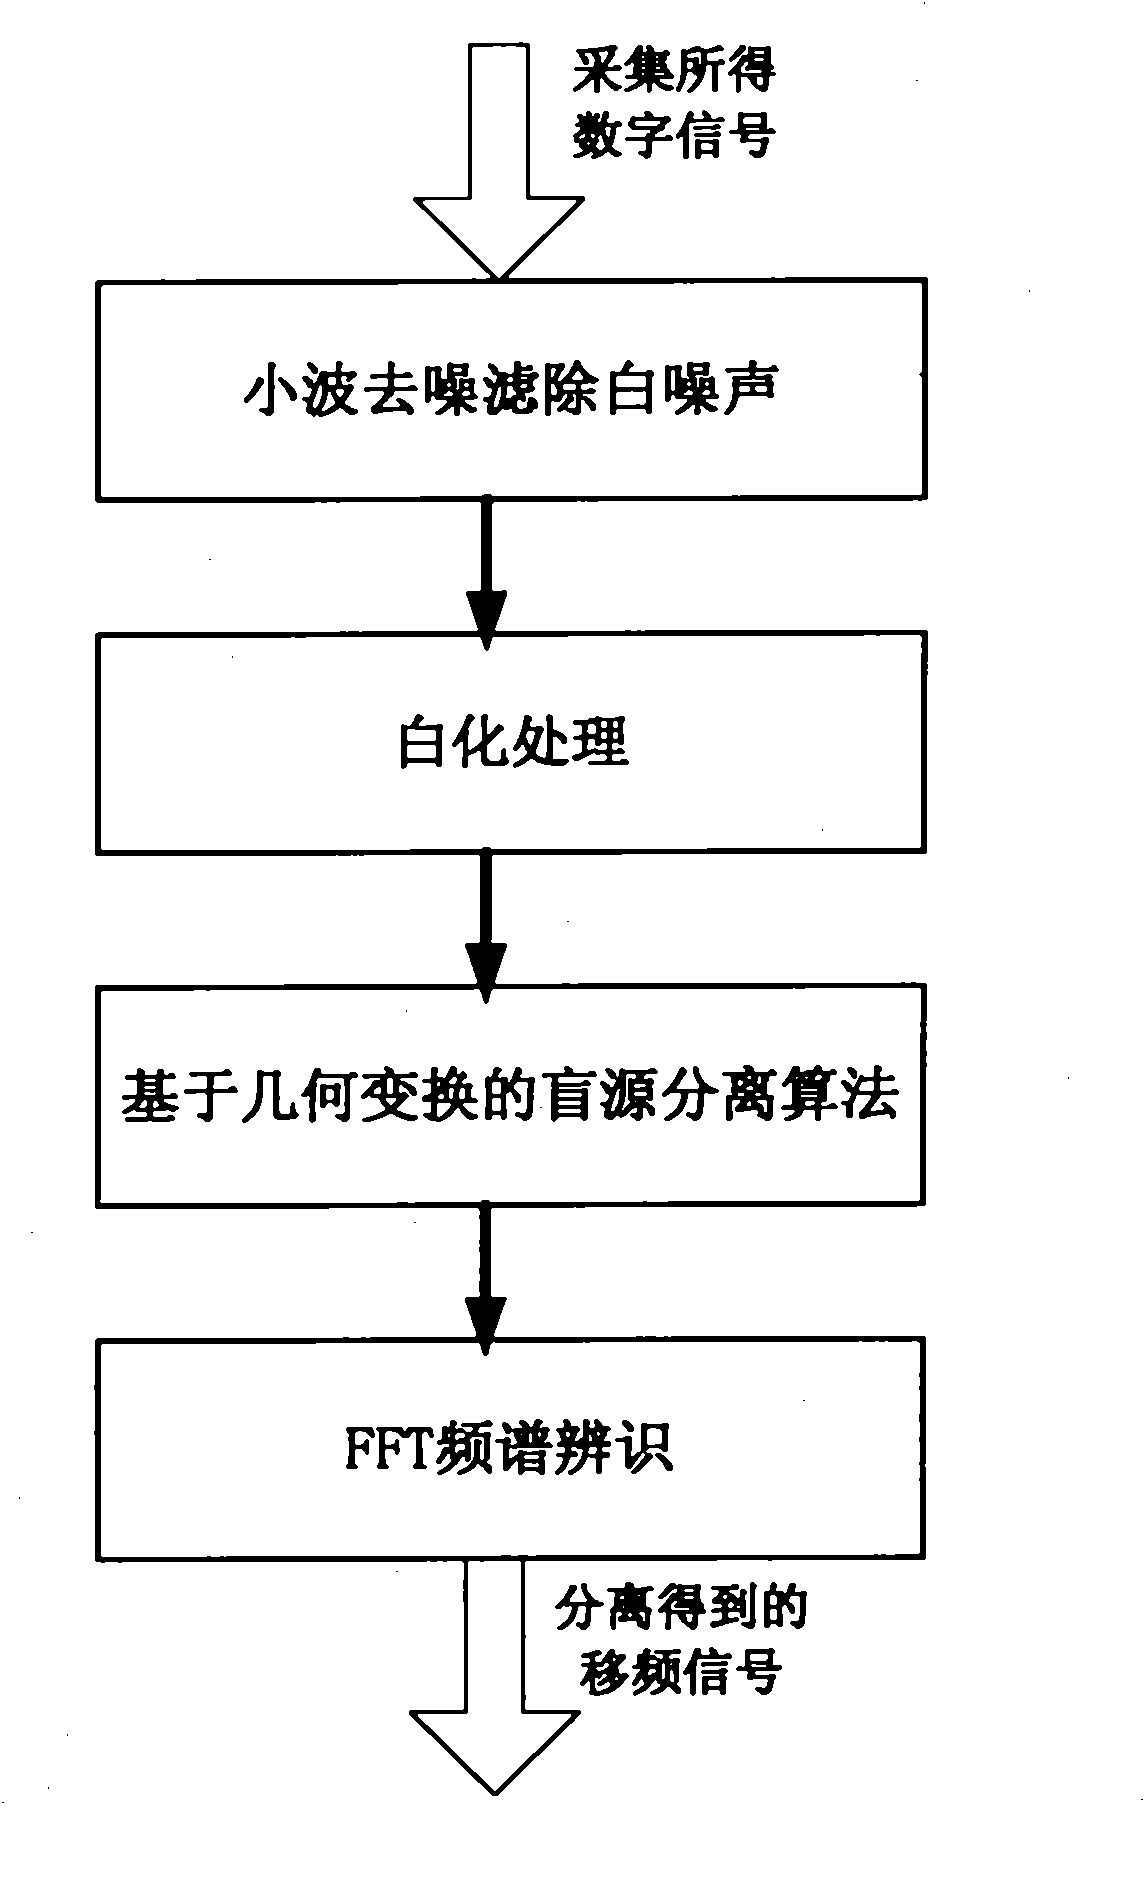 Railway frequency shift signal anti-interference device and method based on blind source separation